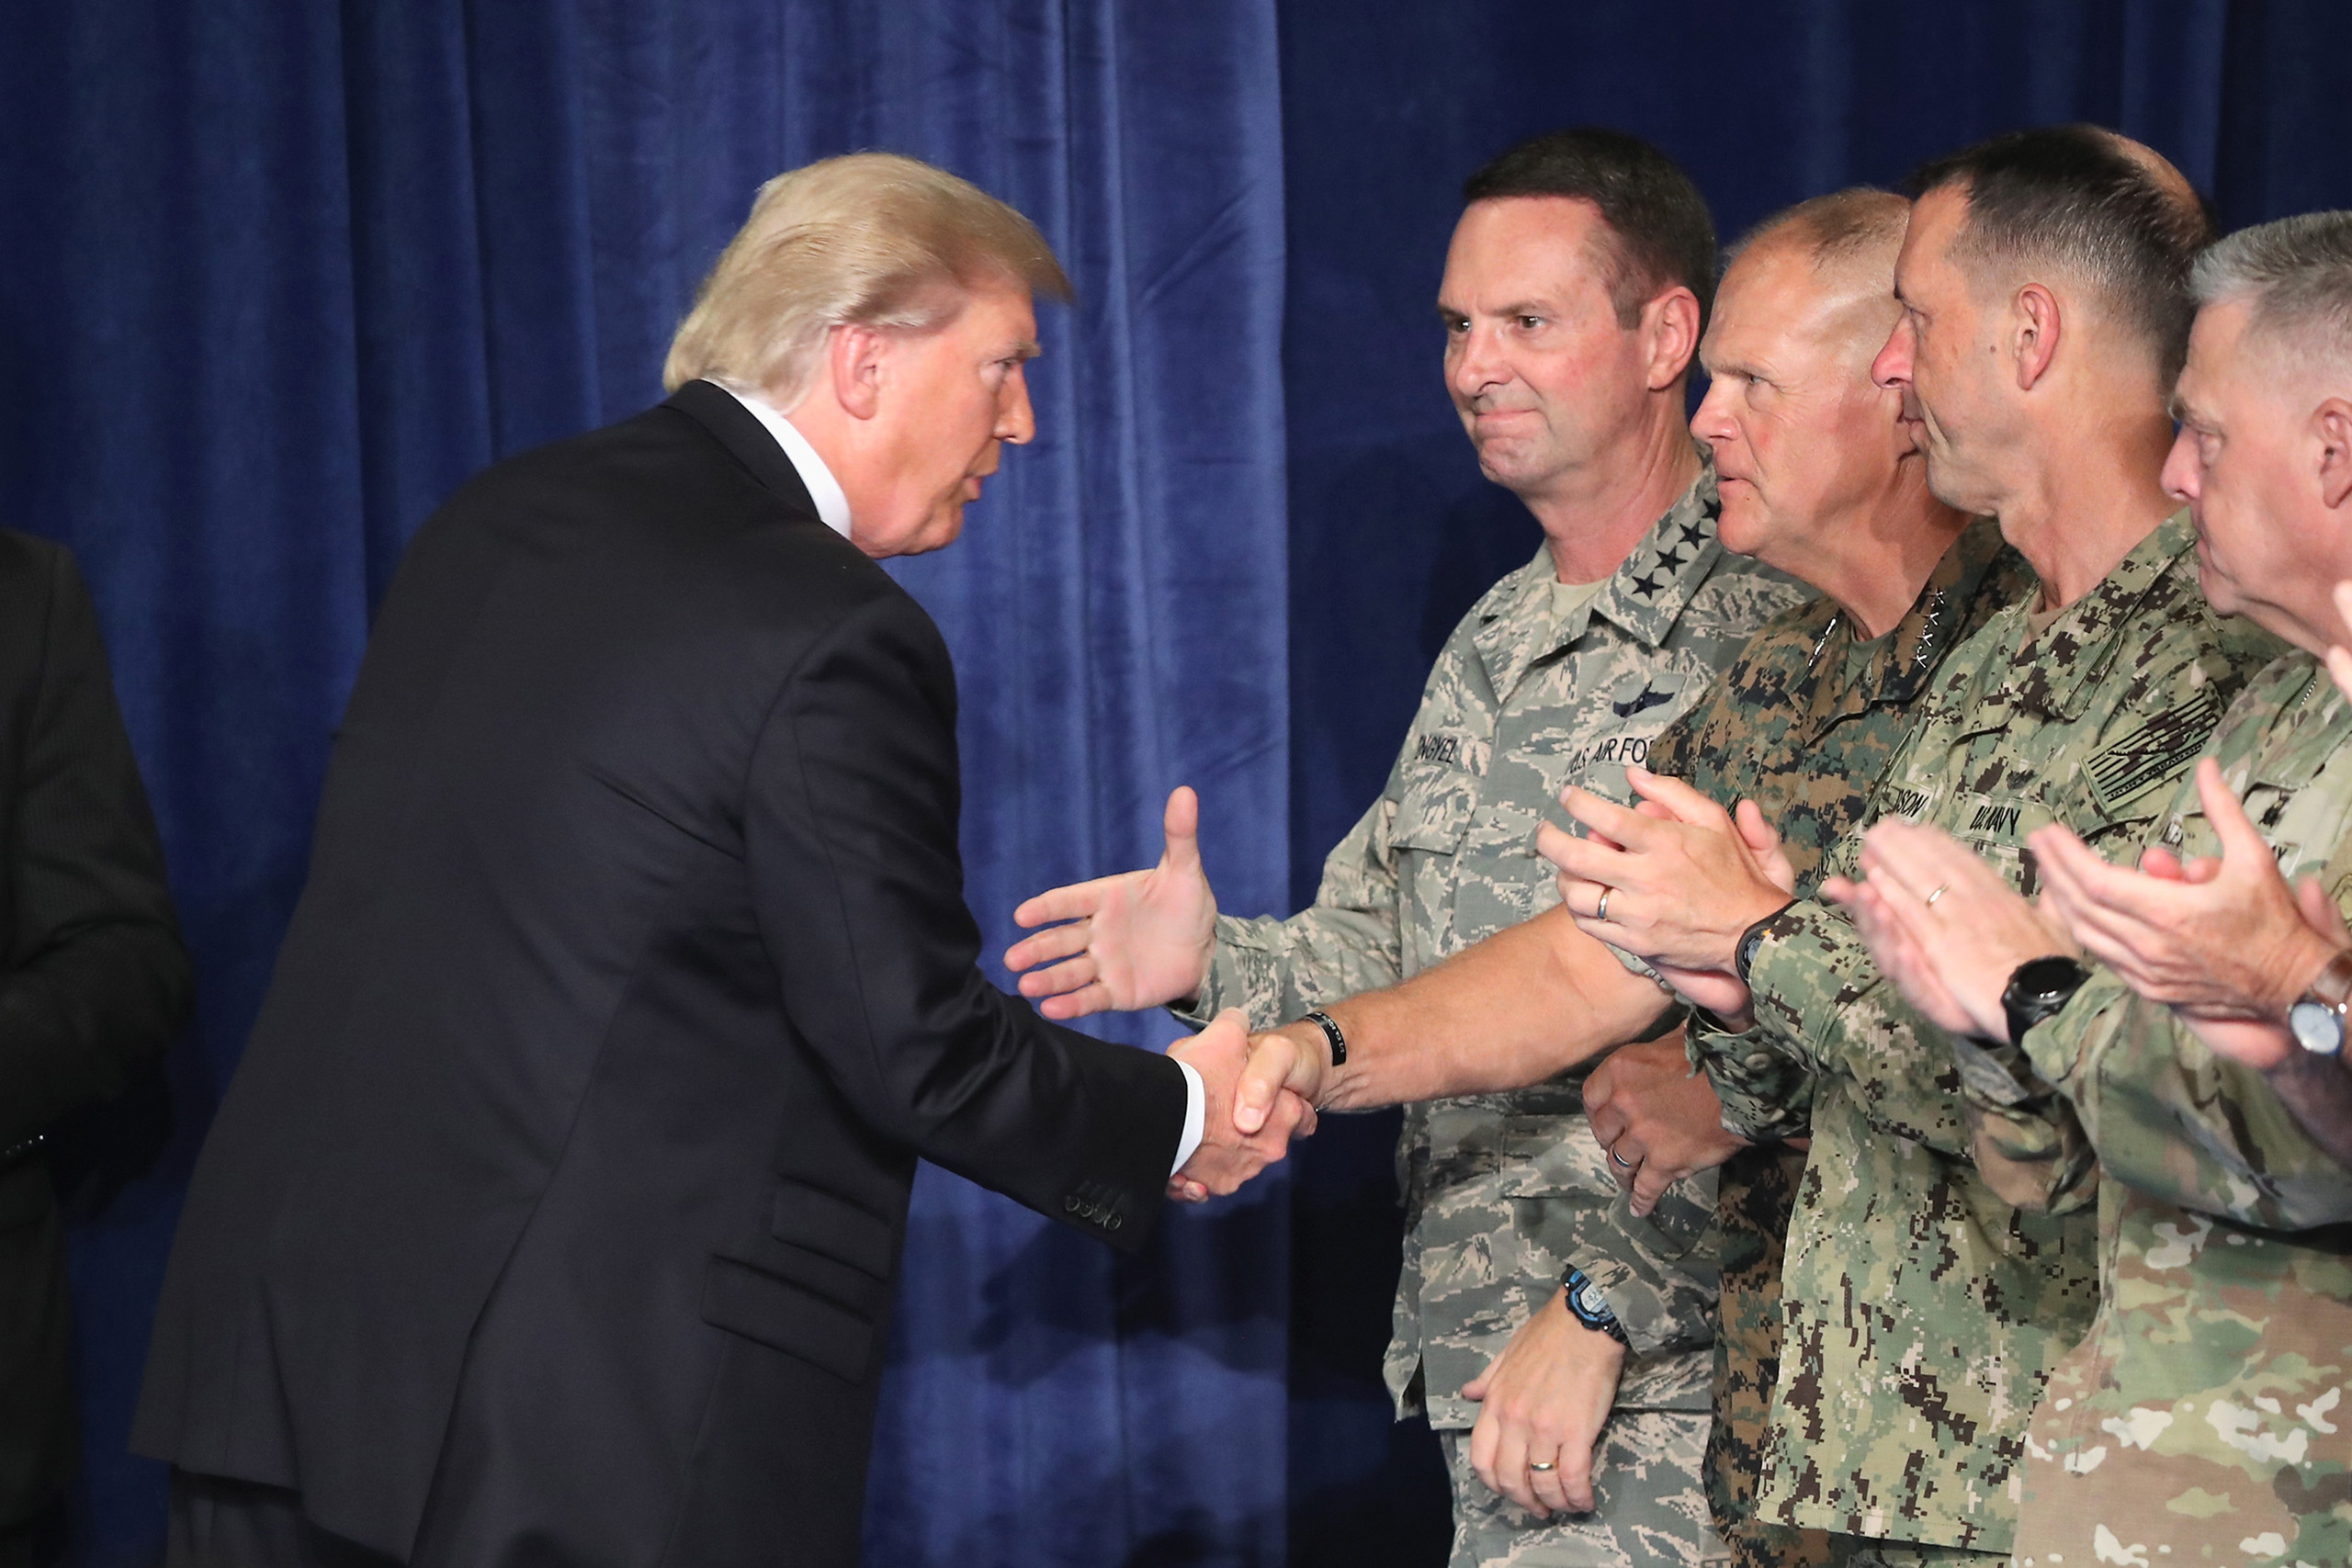 President Donald Trump greets military leaders before his speech on Afghanistan at the Fort Myer military base in Arlington, Virginia, on Aug. 21, 2017. (Mark Wilson—Getty Images)